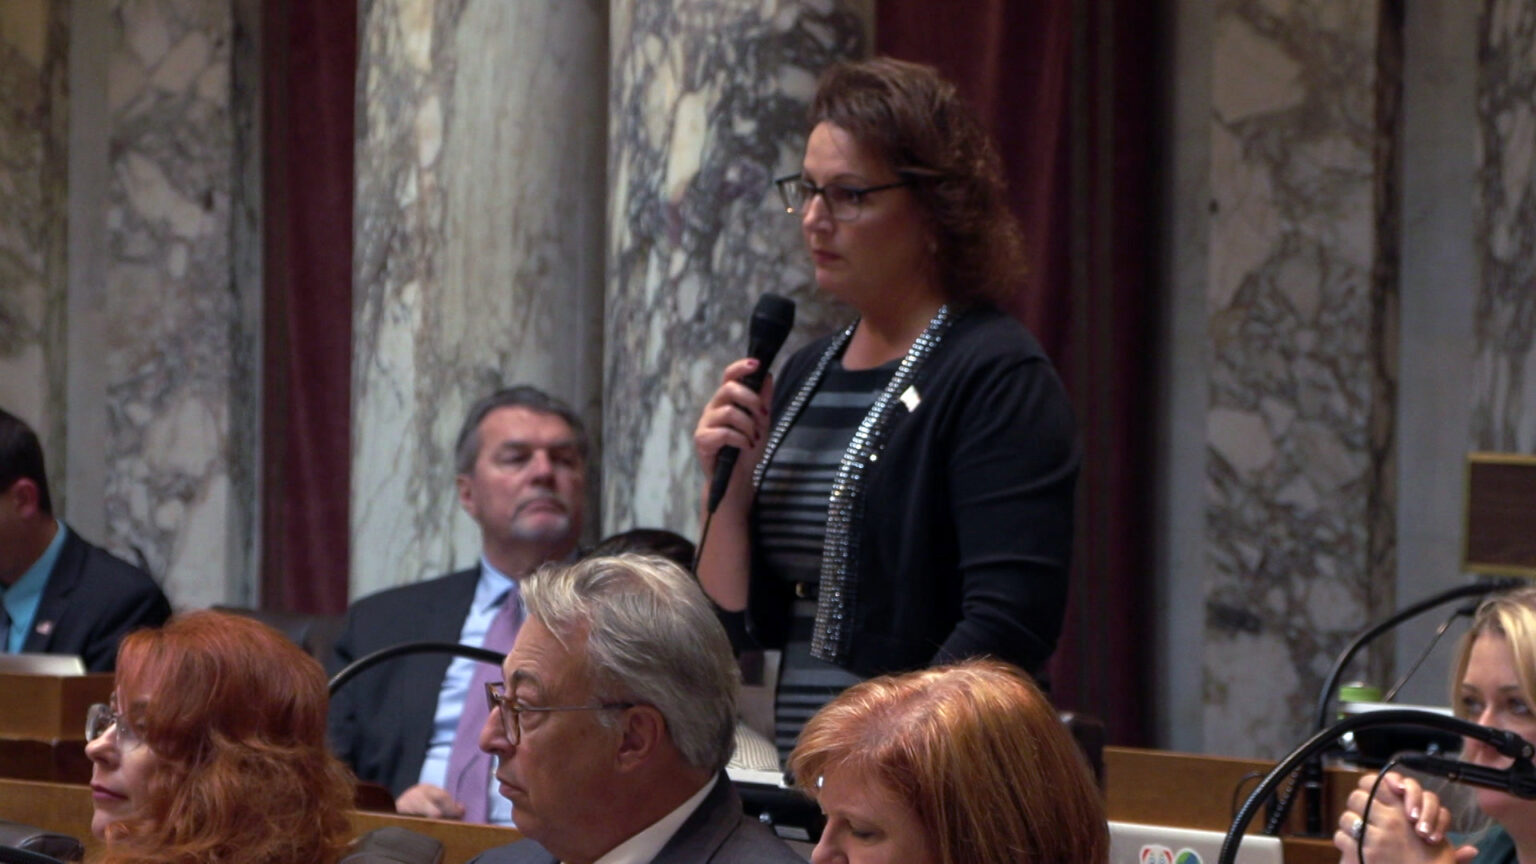 Amy Binsfield speaks into a microphone she is holding in her right hand while standing among other people seated in rows of wood desks, in a room with marble masonry.